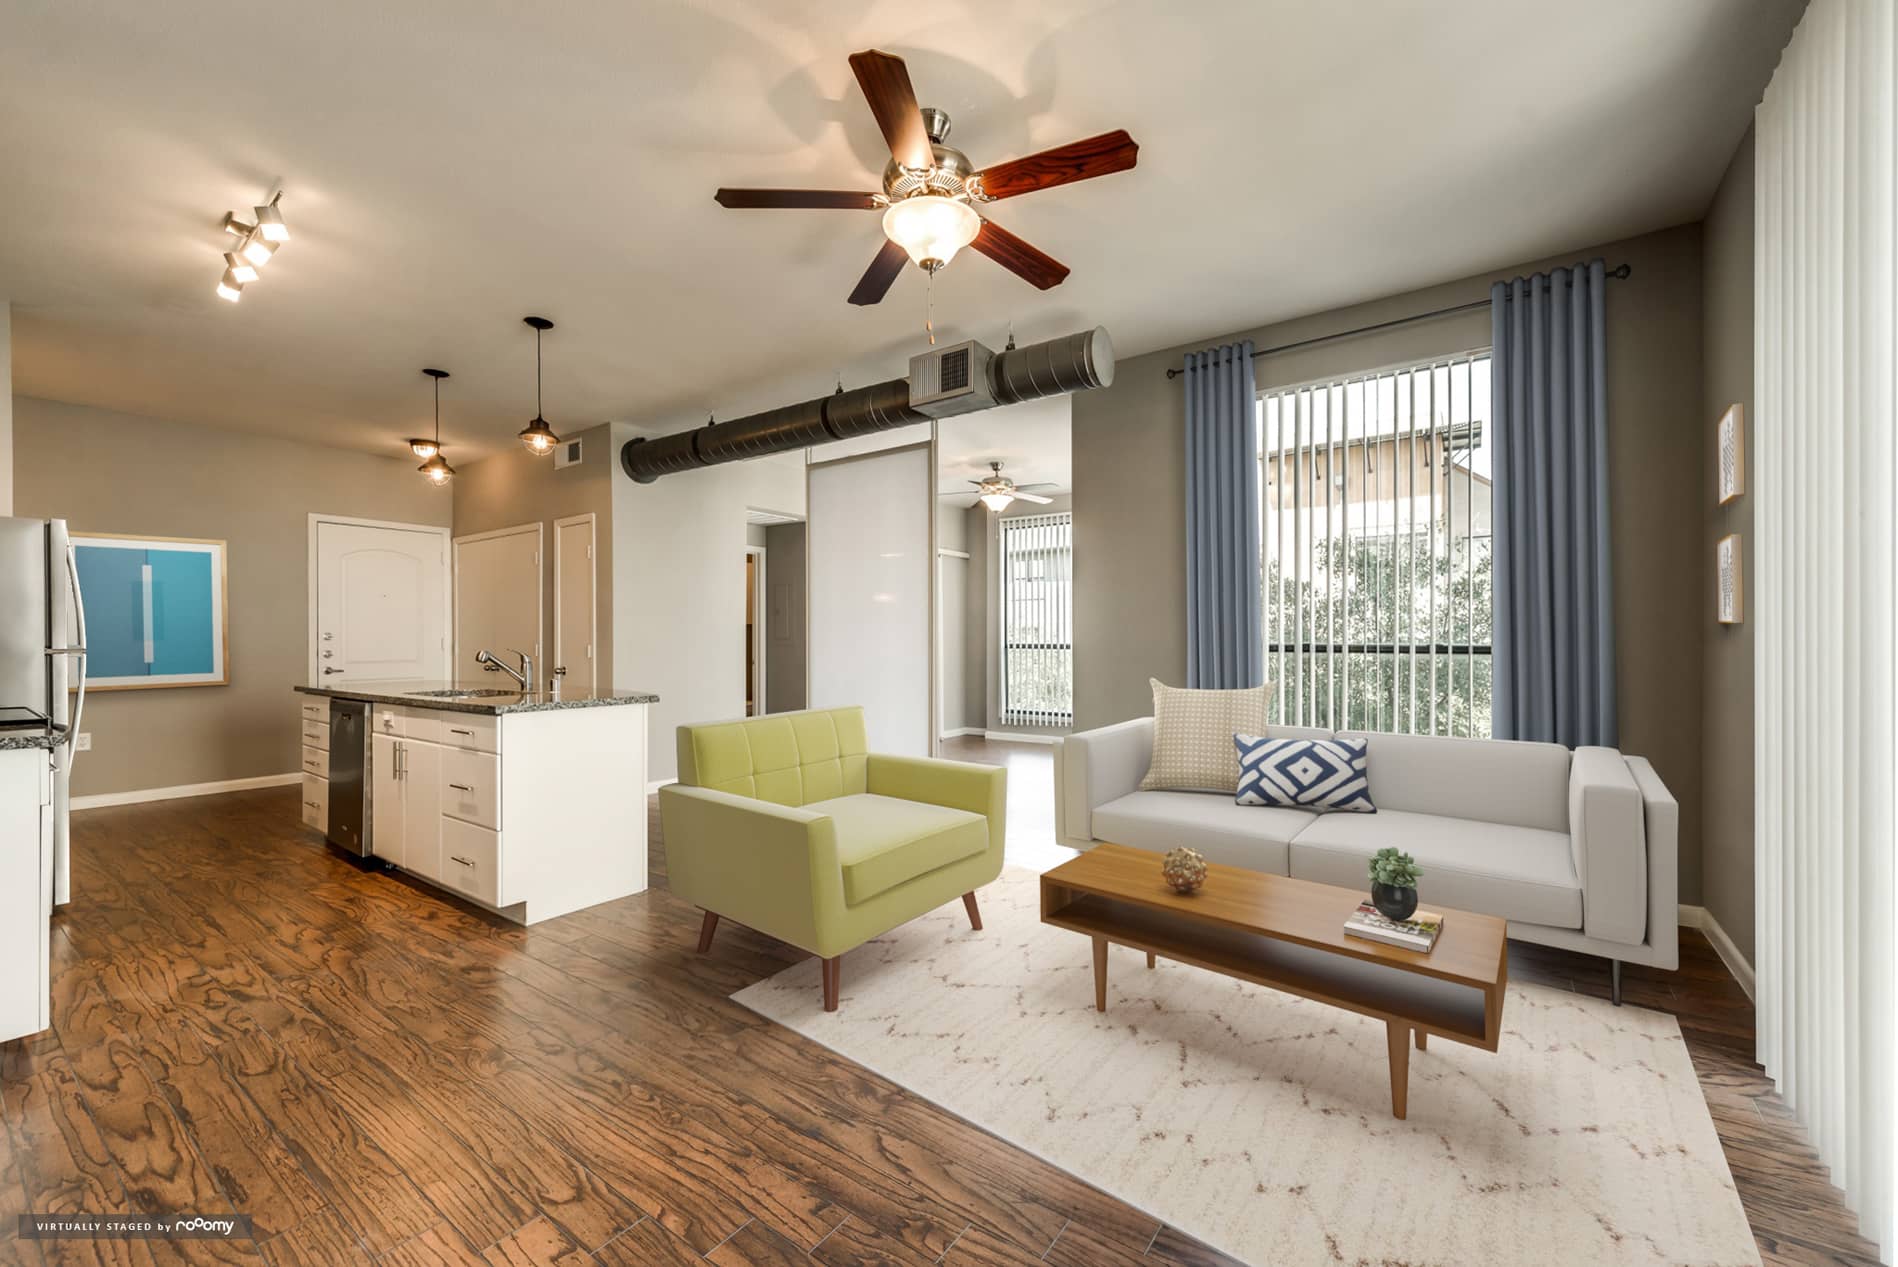 Legacy Village apartment virtually staged by RoOomy